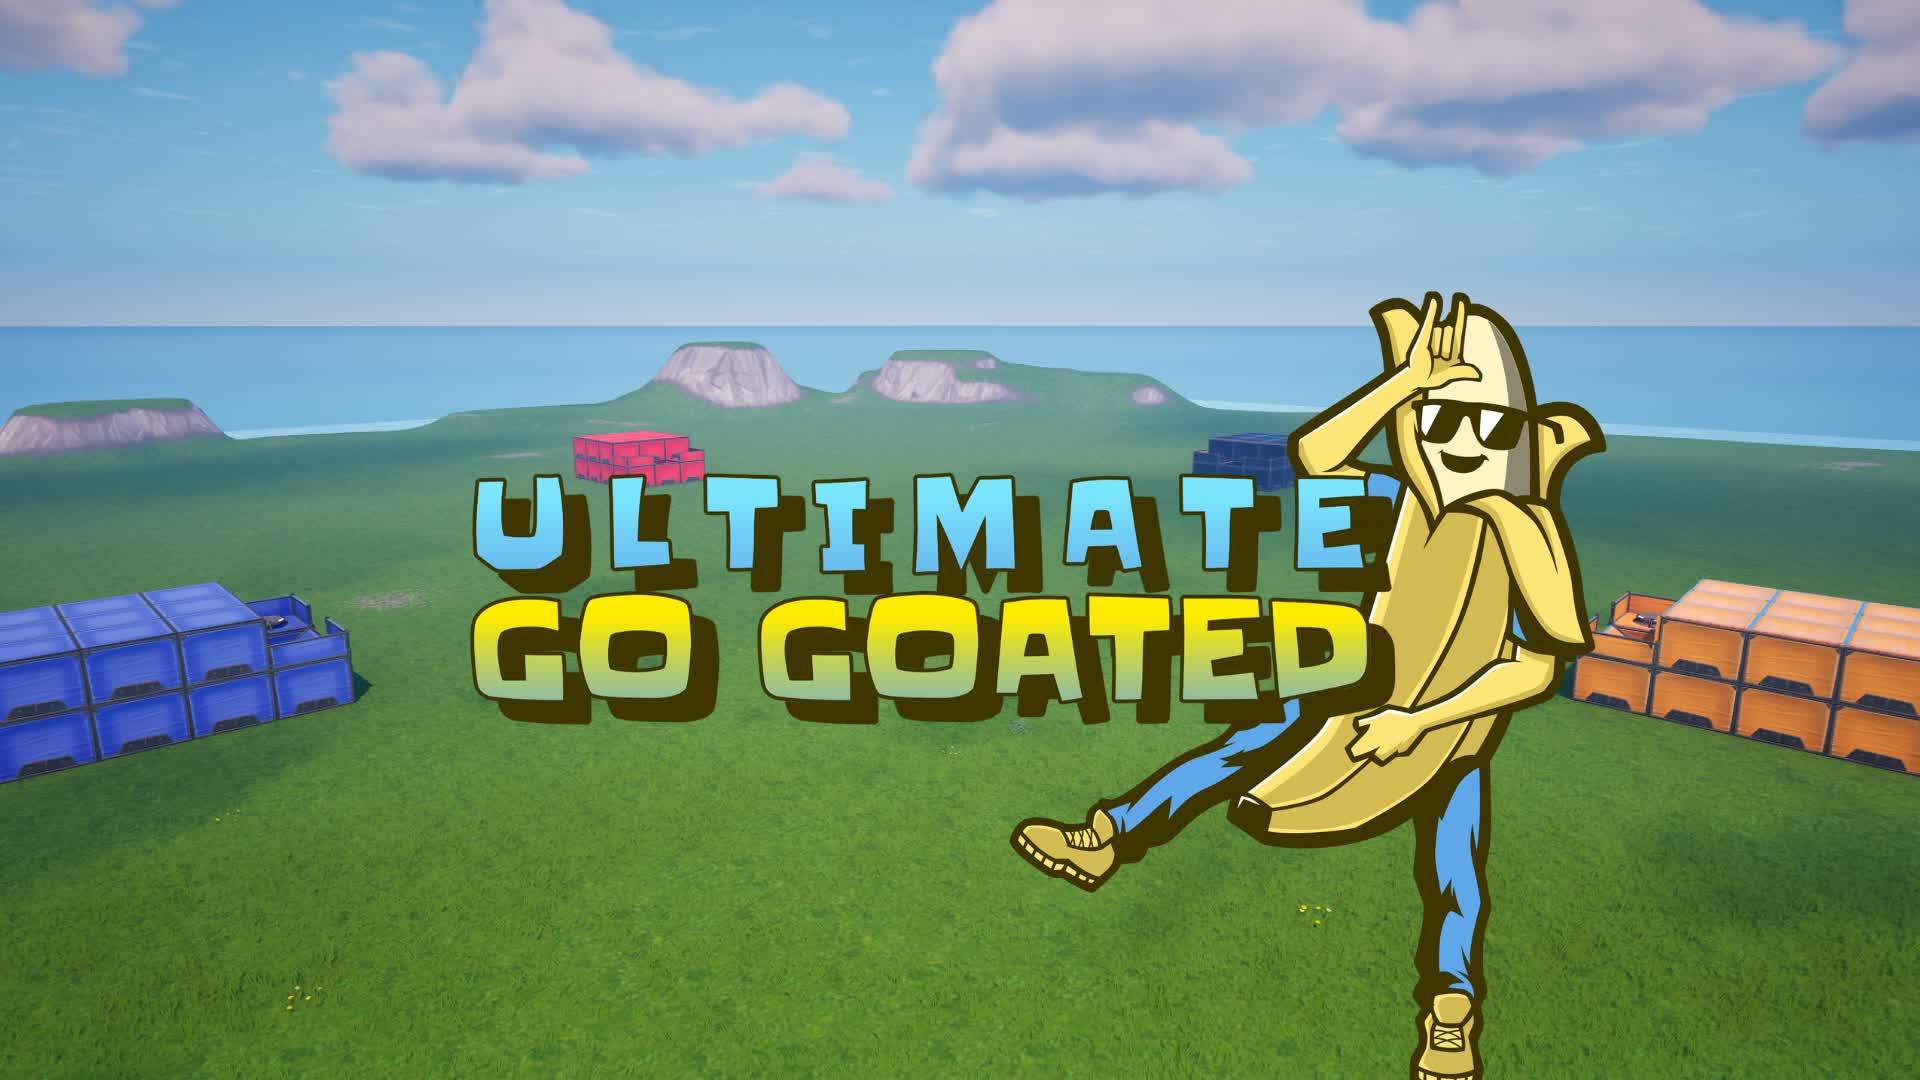 🐐 ULTIMATE GO GOATED! 🐐